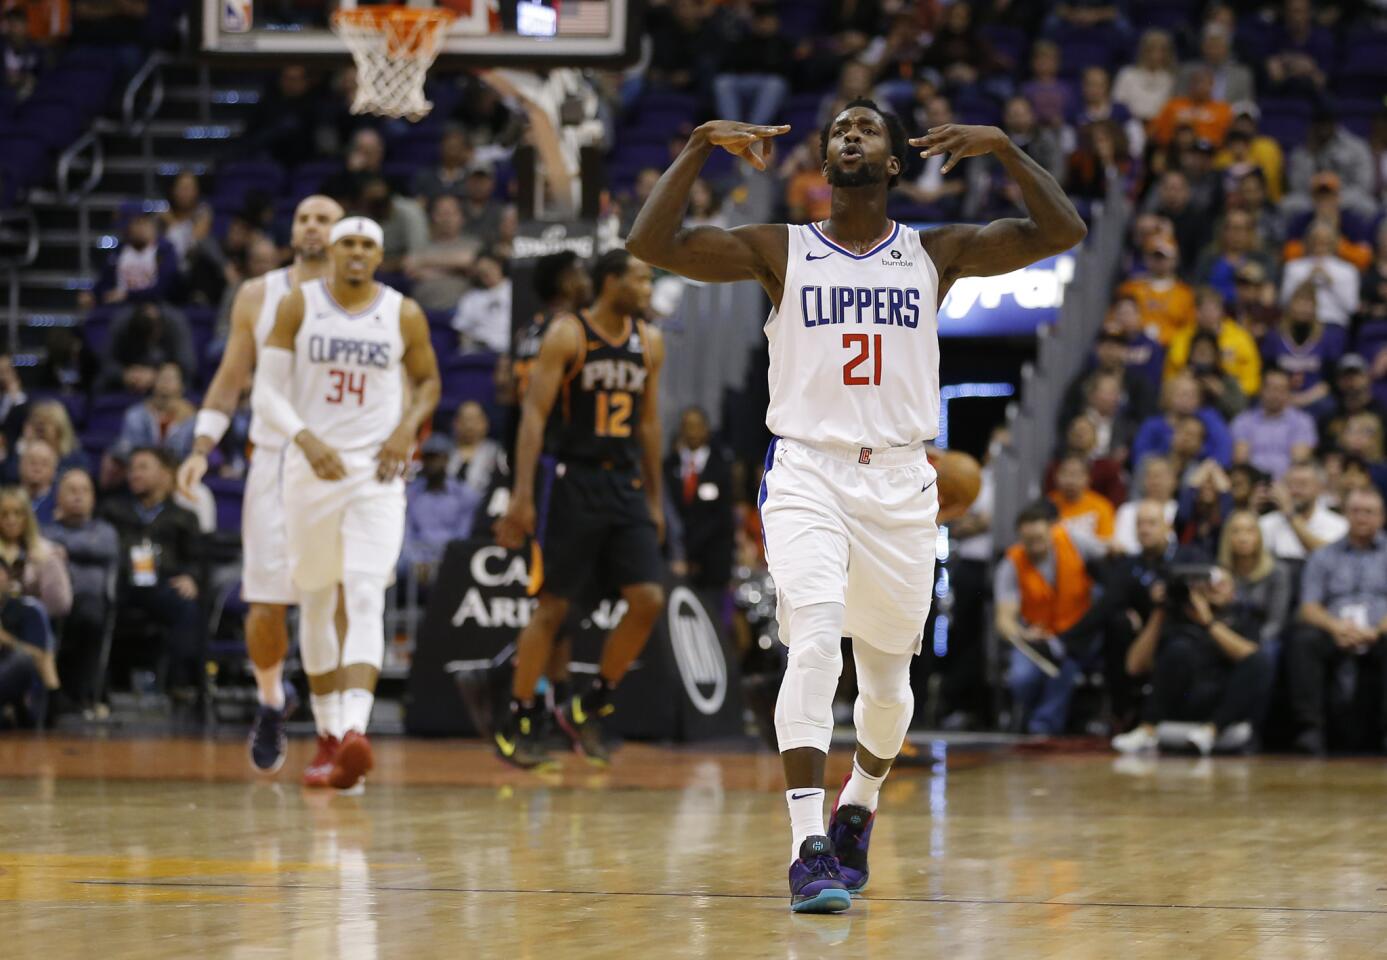 Los Angeles Clippers guard Patrick Beverley (21) in the first half during an NBA basketball game against the Phoenix Suns, Friday, Jan. 4, 2019, in Phoenix. (AP Photo/Rick Scuteri)